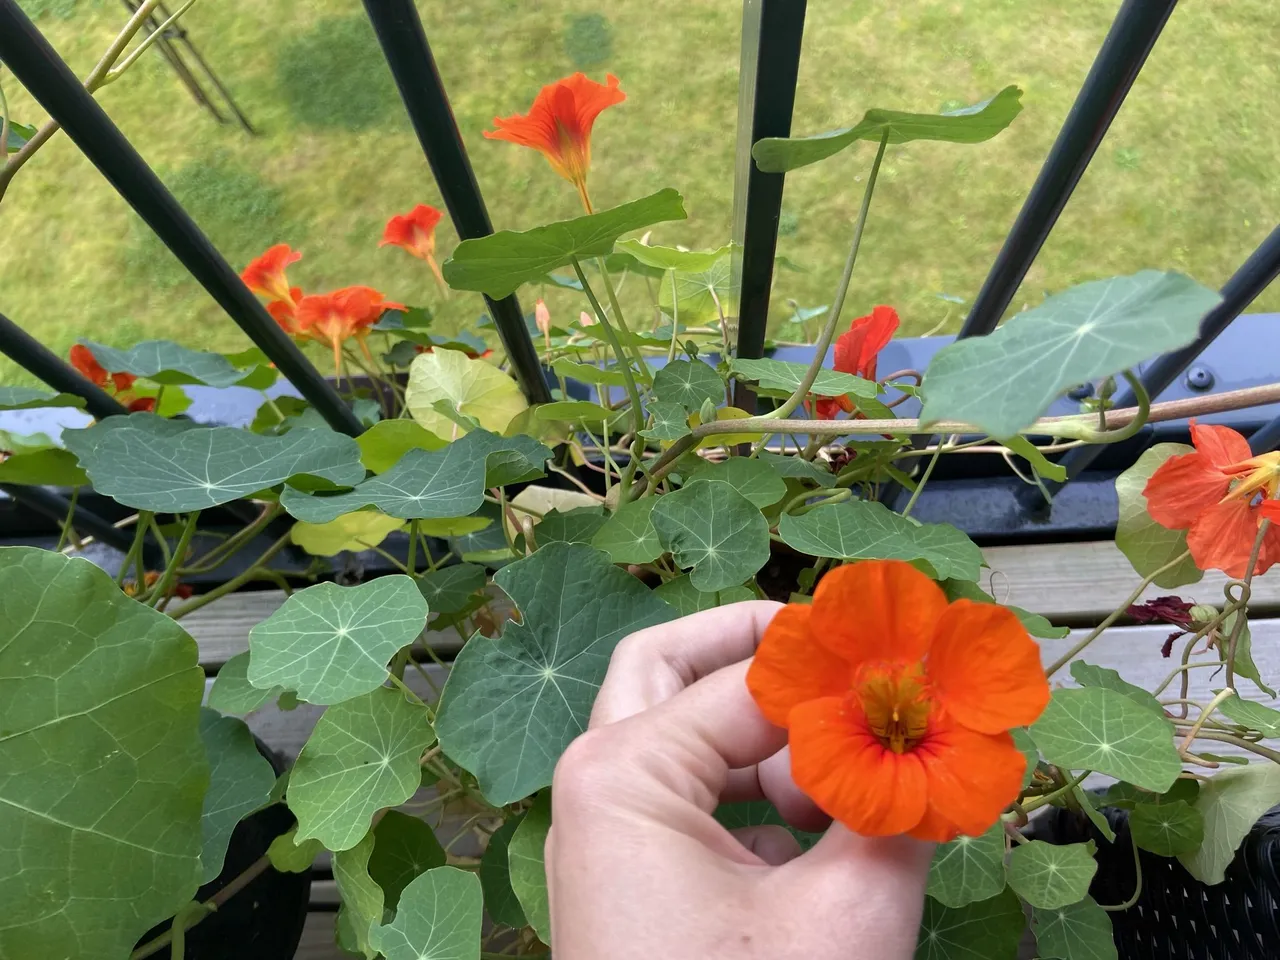 Nasturtium is one of my favorites.The flowers are edible, and its lovely on cakes. Overbloomed flowers are nice to use in icecbues too.